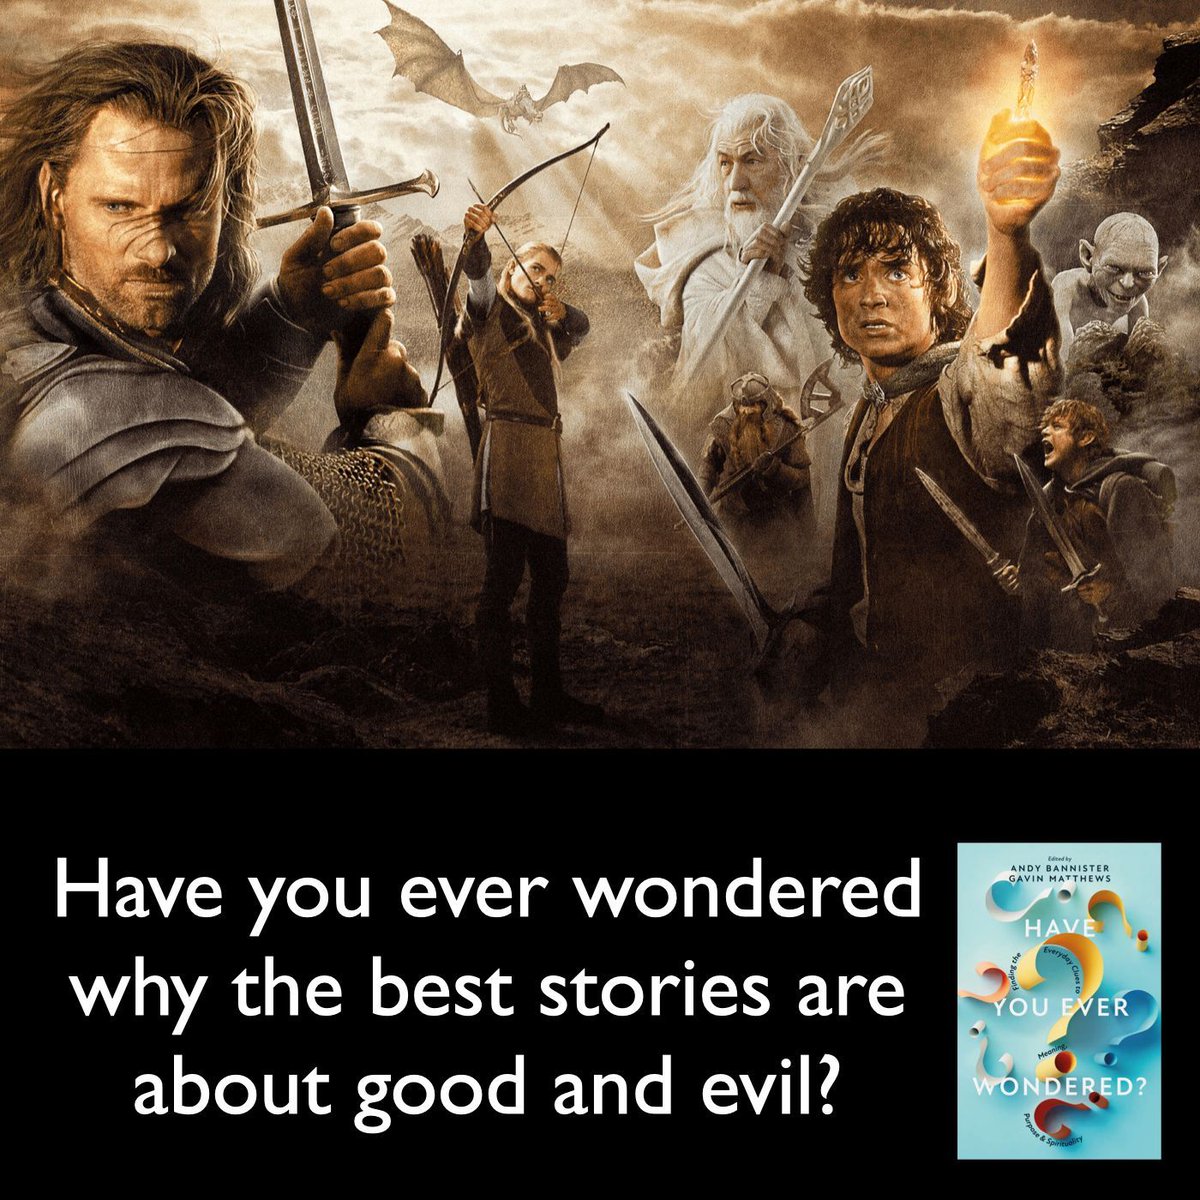 Have you ever wondered why the best stories are almost always about good and evil? What is it about these themes we find so compelling? That's one of many questions we explore in the best-selling new book, 'Have You Ever Wondered?'. Find it at buff.ly/3UJqXJA.